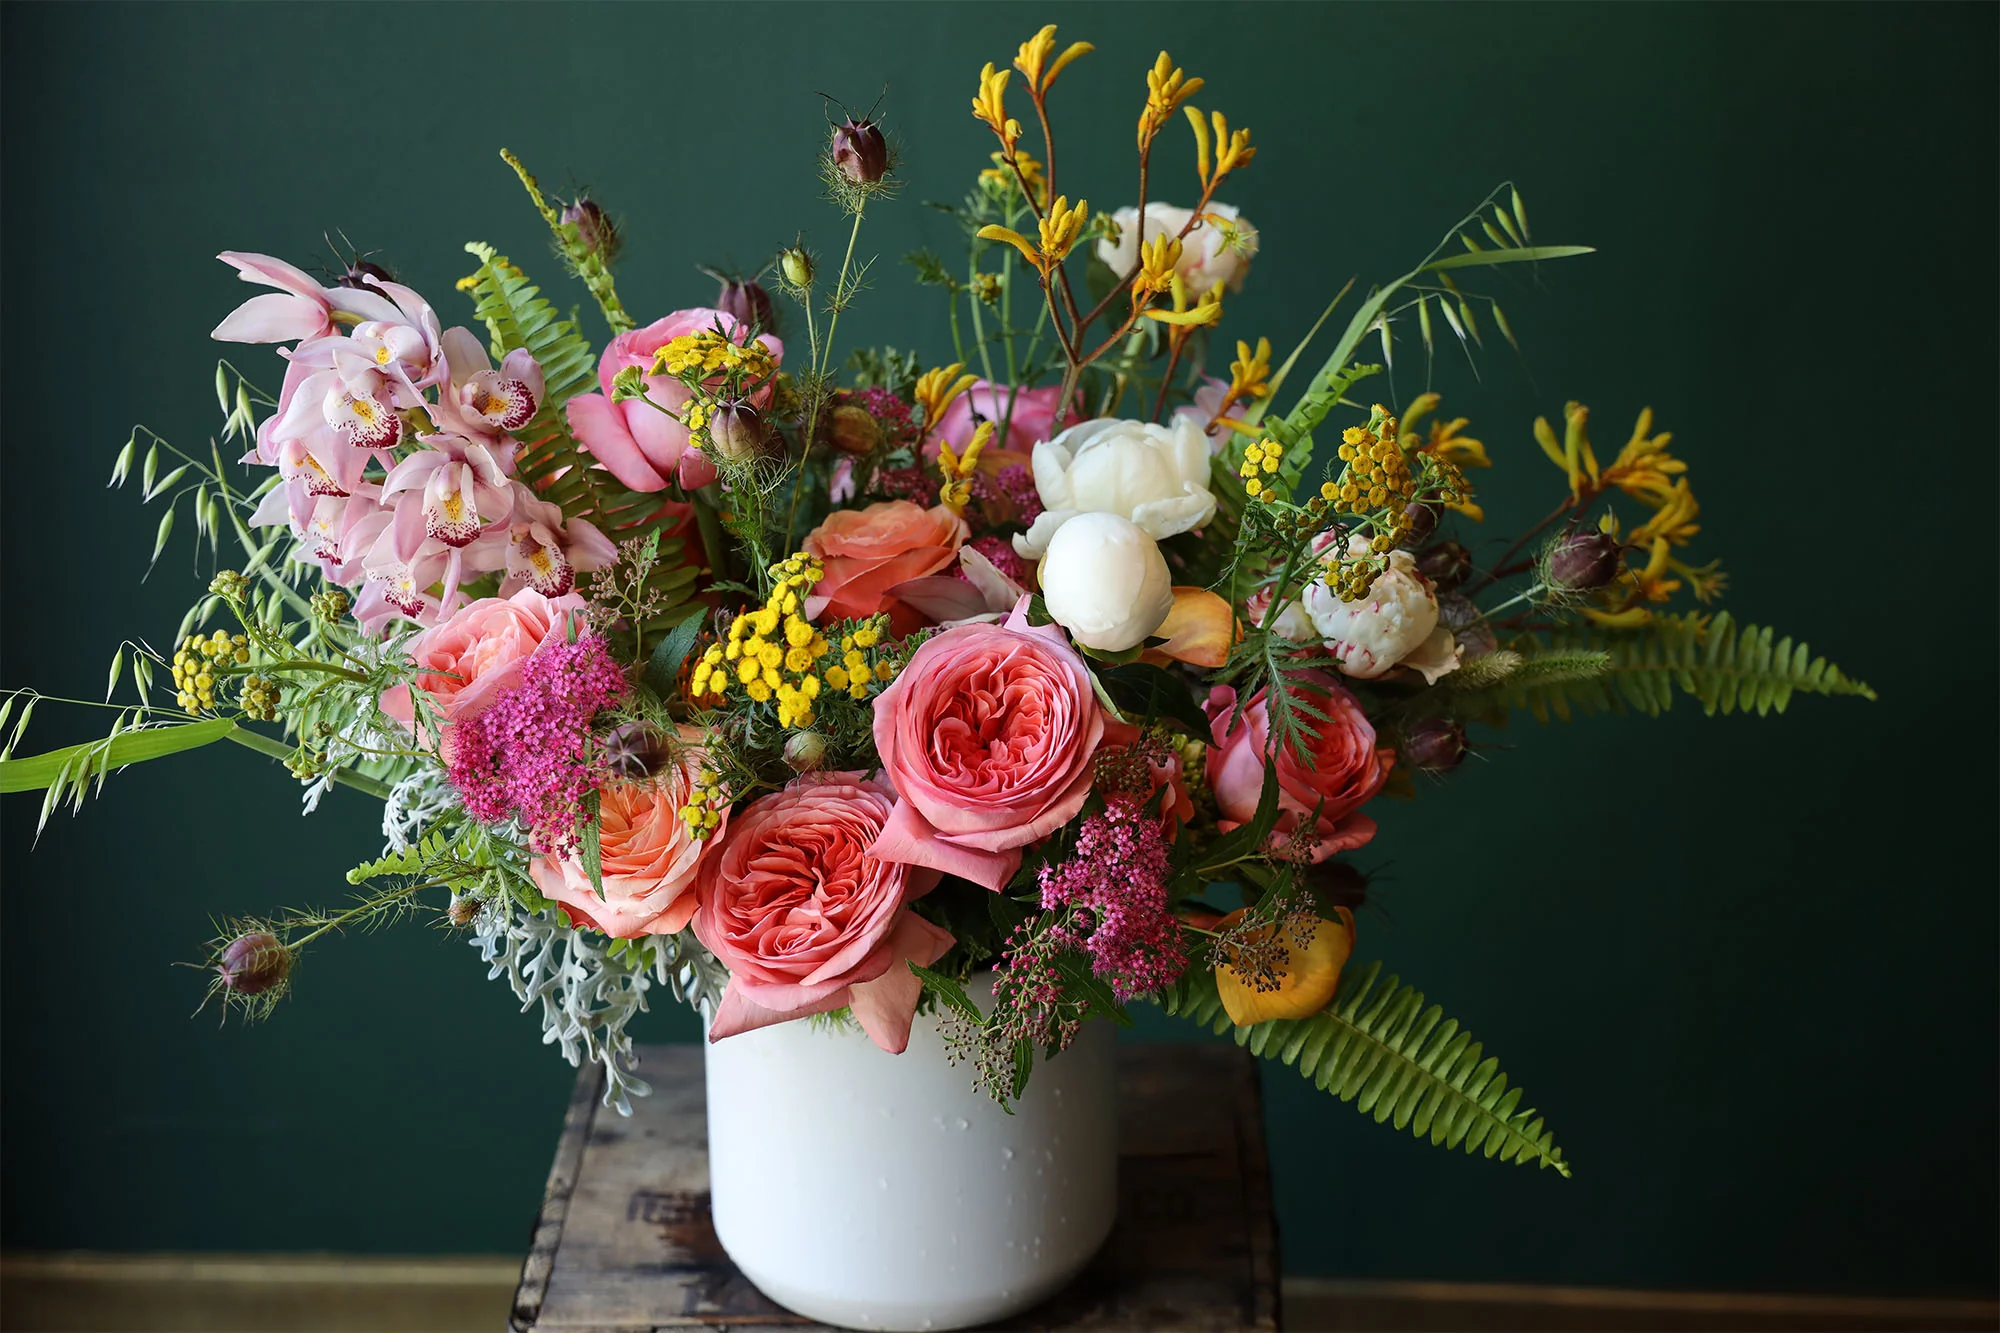 Transforming Moments with Toronto’s Exquisite Flower Company